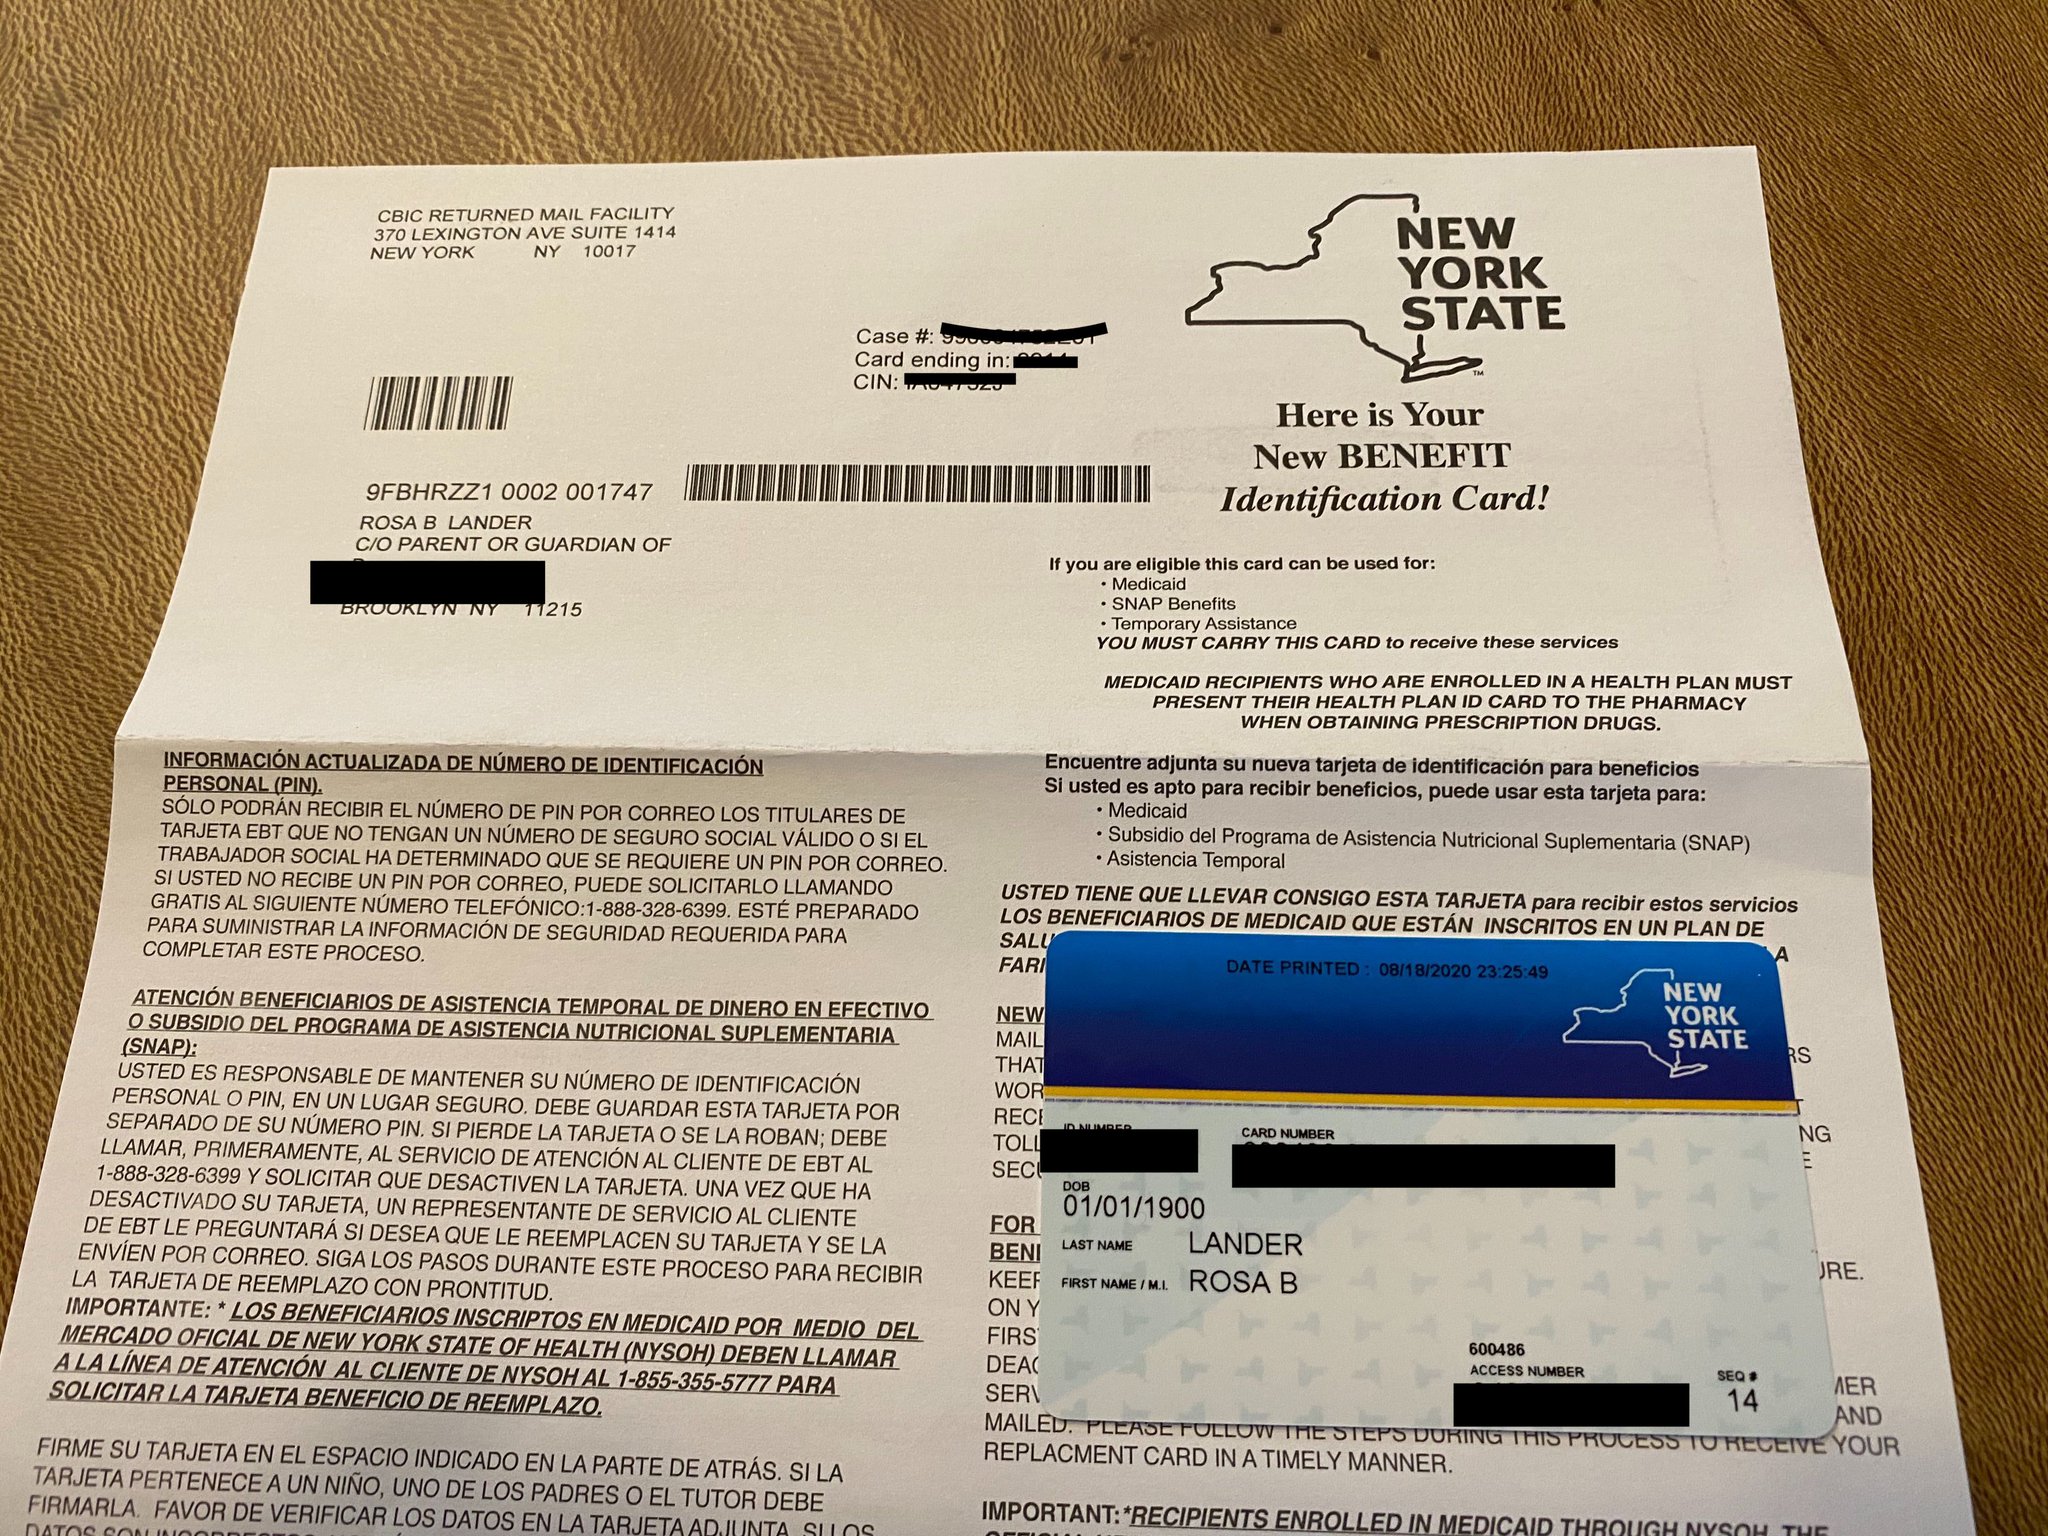 Brad Lander On Twitter We Got Our Pandemic Ebt Card In The Mail Today It Comes In A Plain Easy To Miss Envelope So Keep An Eye Out For Yours And Use It All